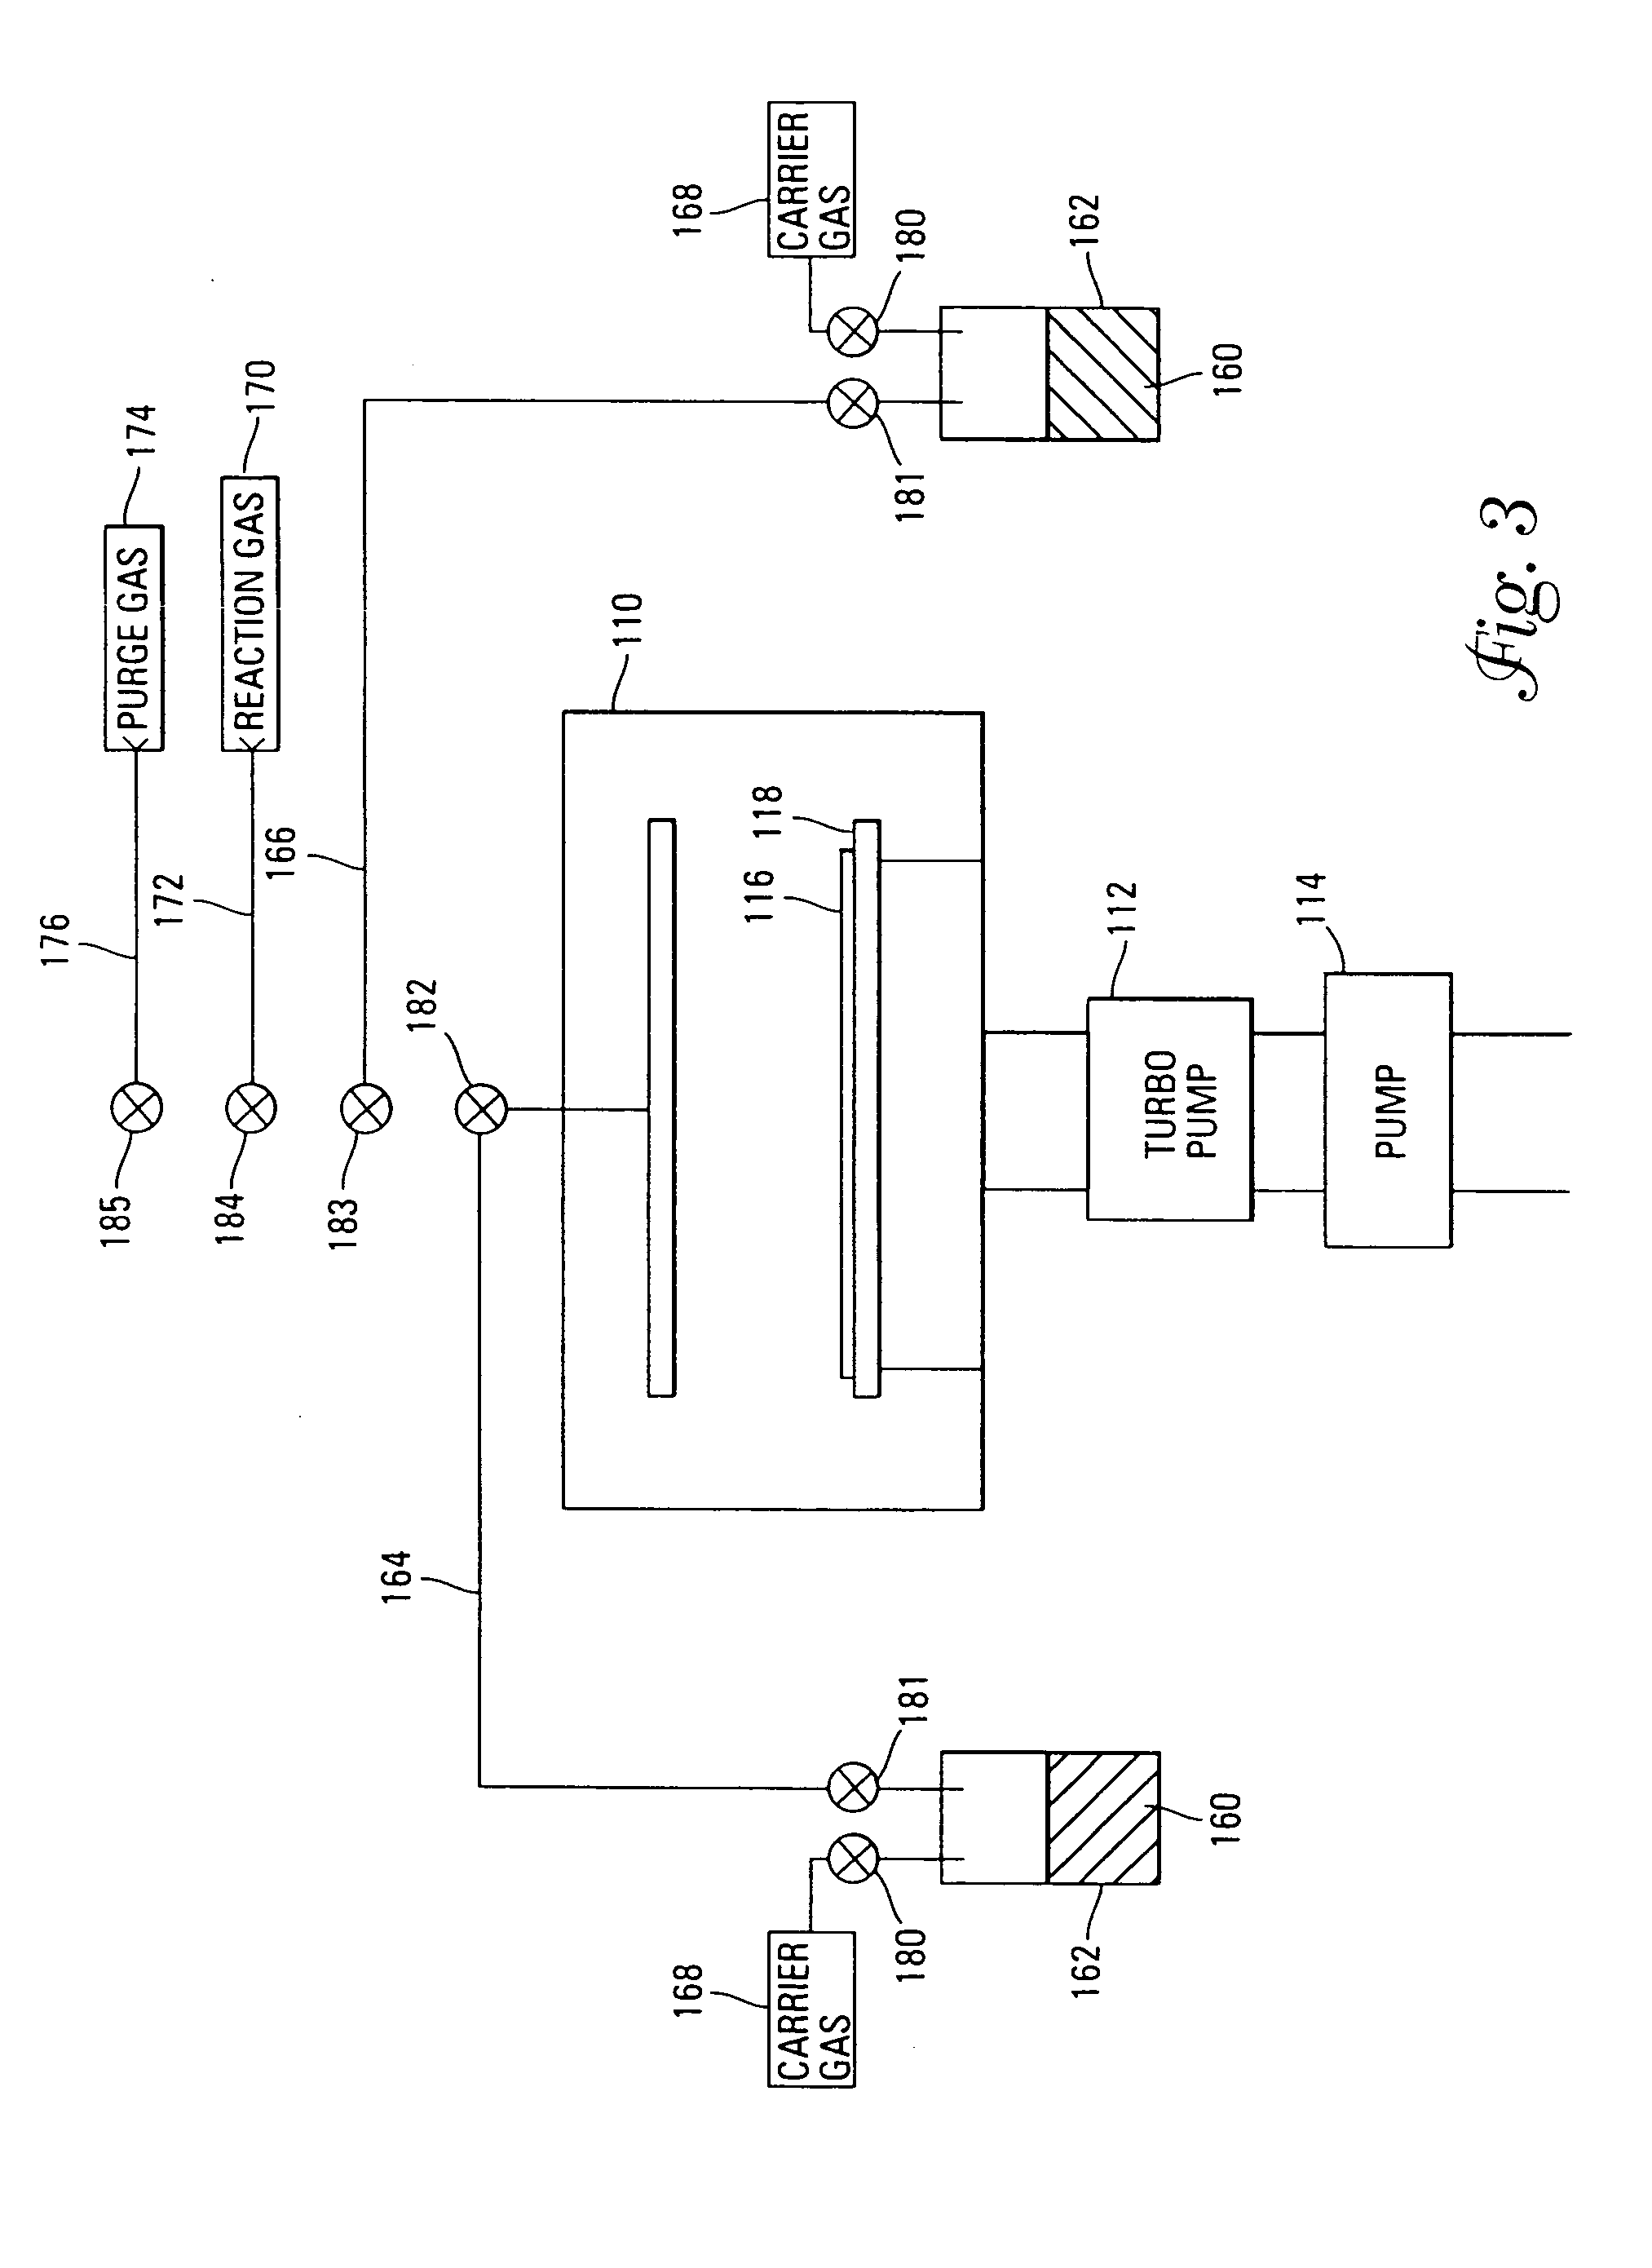 Systems and methods of forming tantalum silicide layers